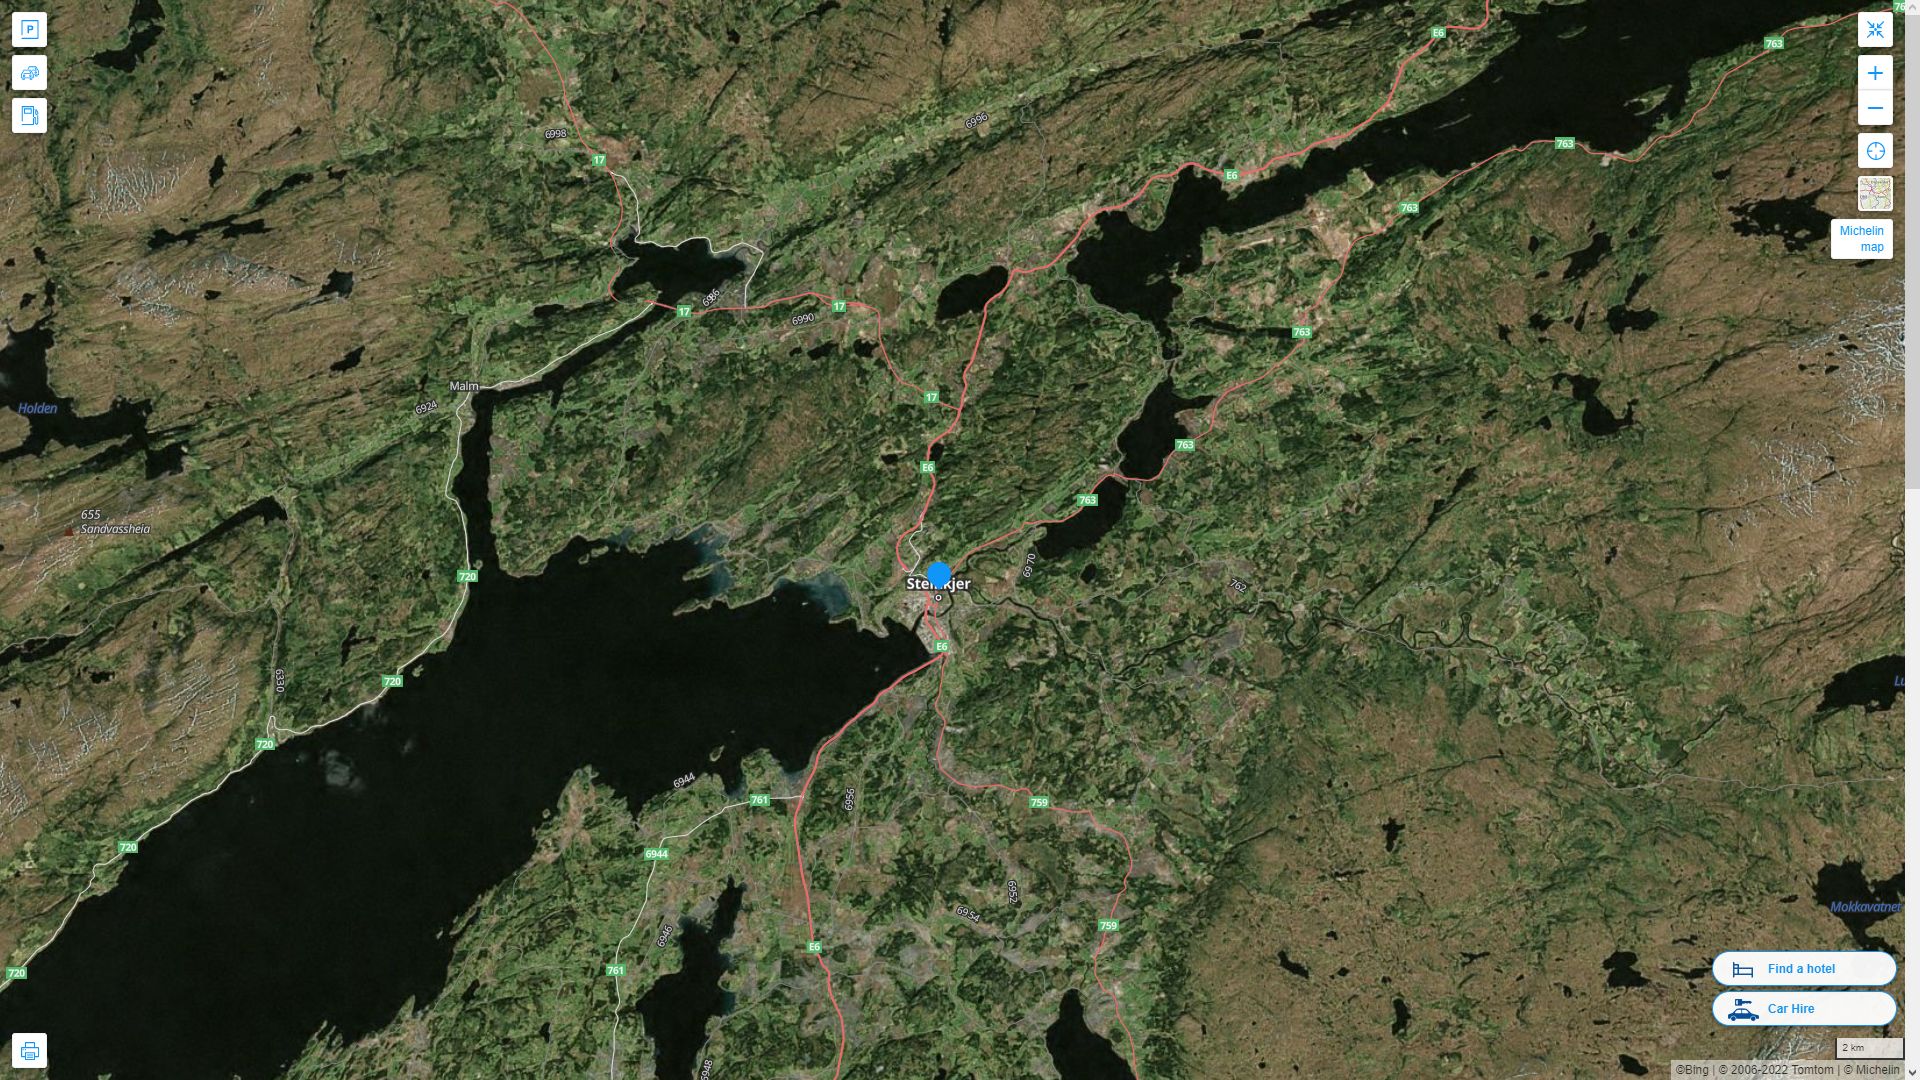 Steinkjer Highway and Road Map with Satellite View